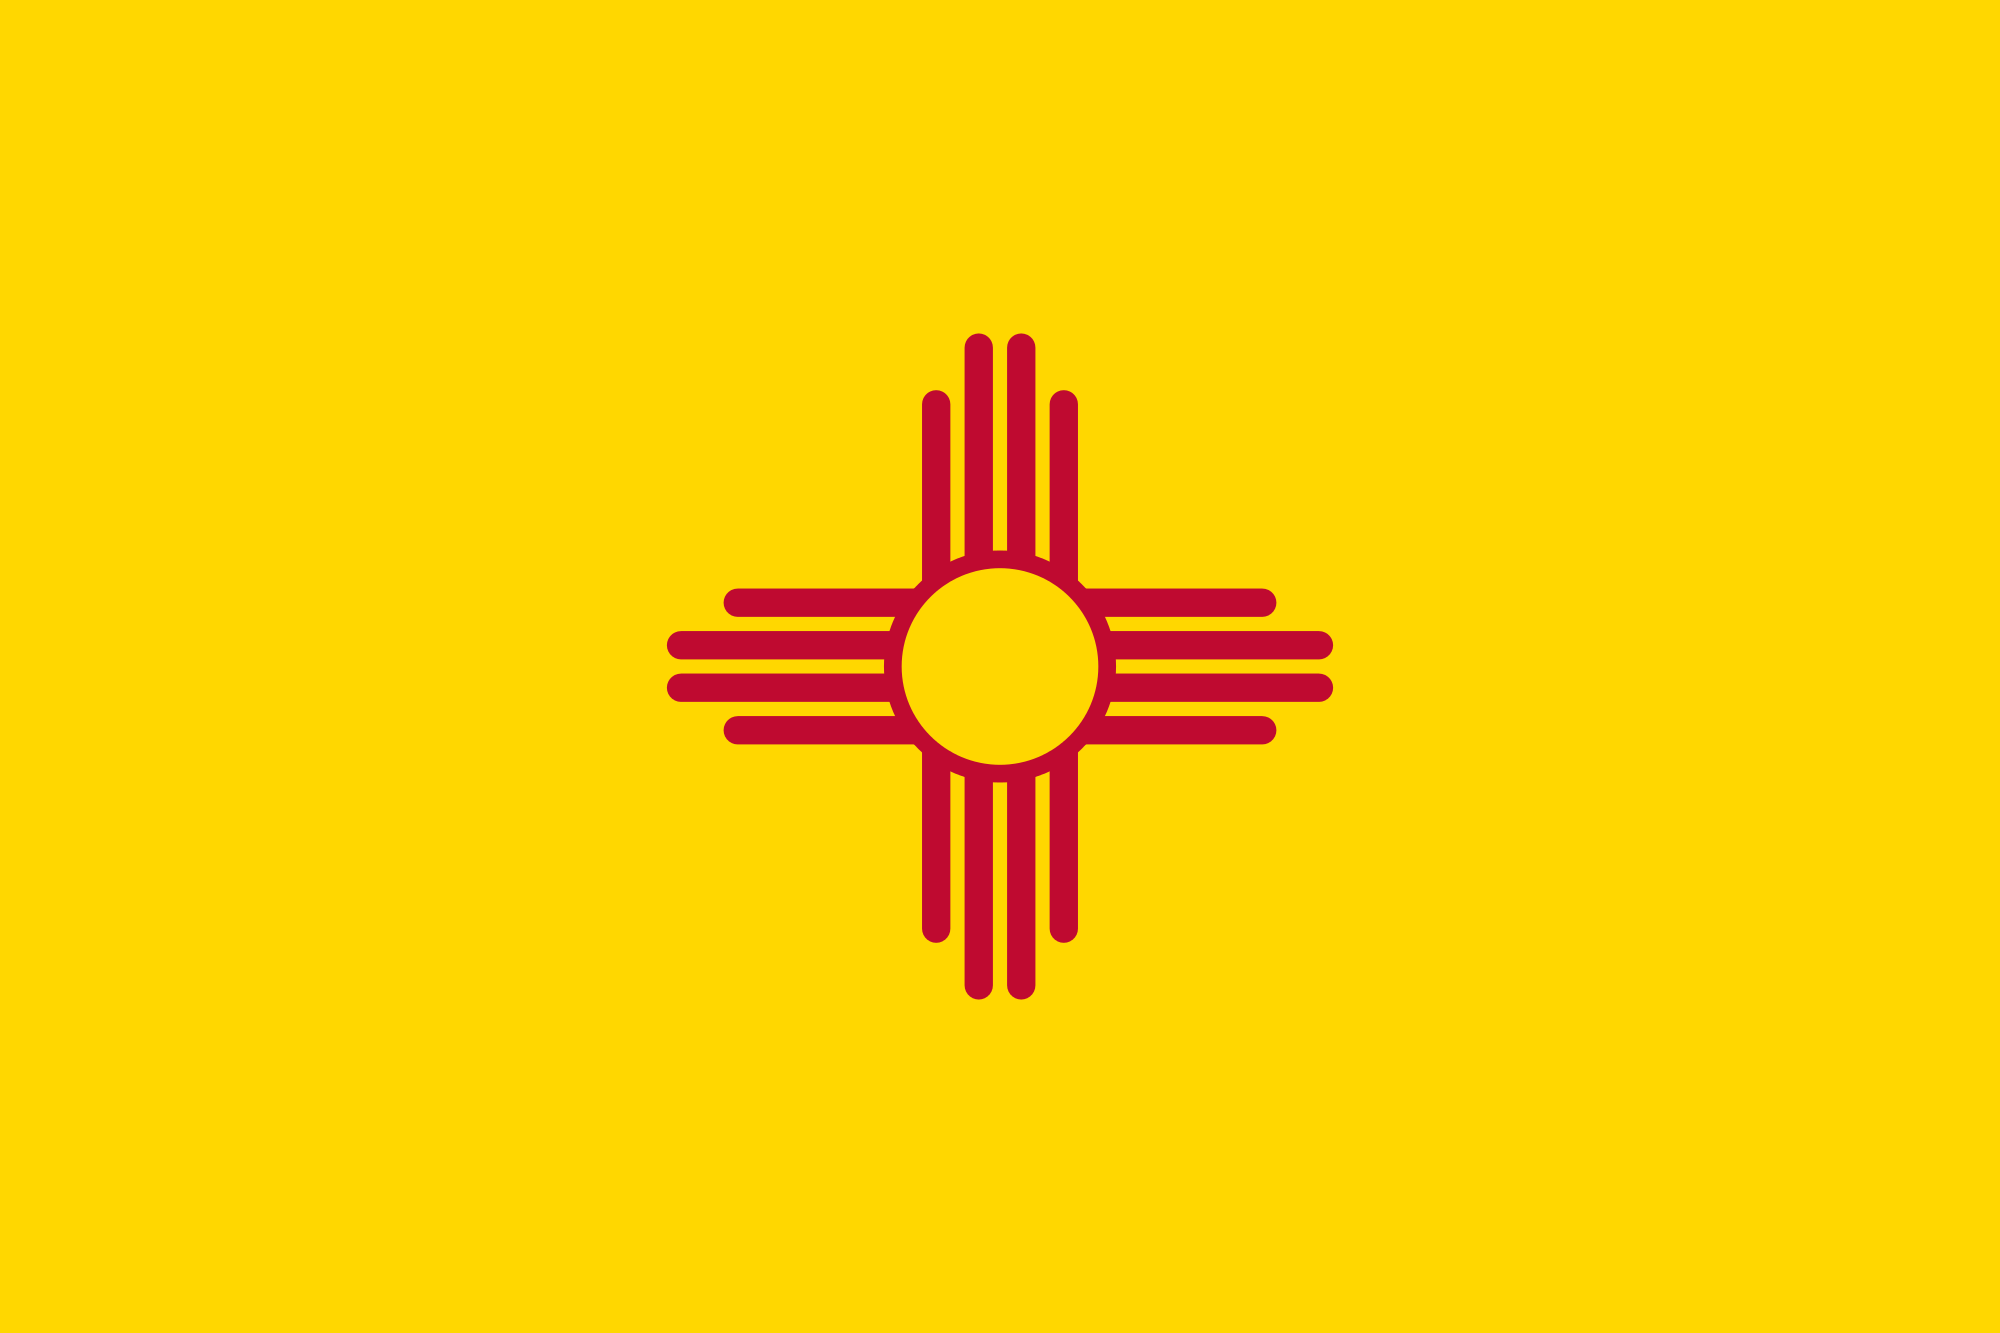 New Mexico weed laws